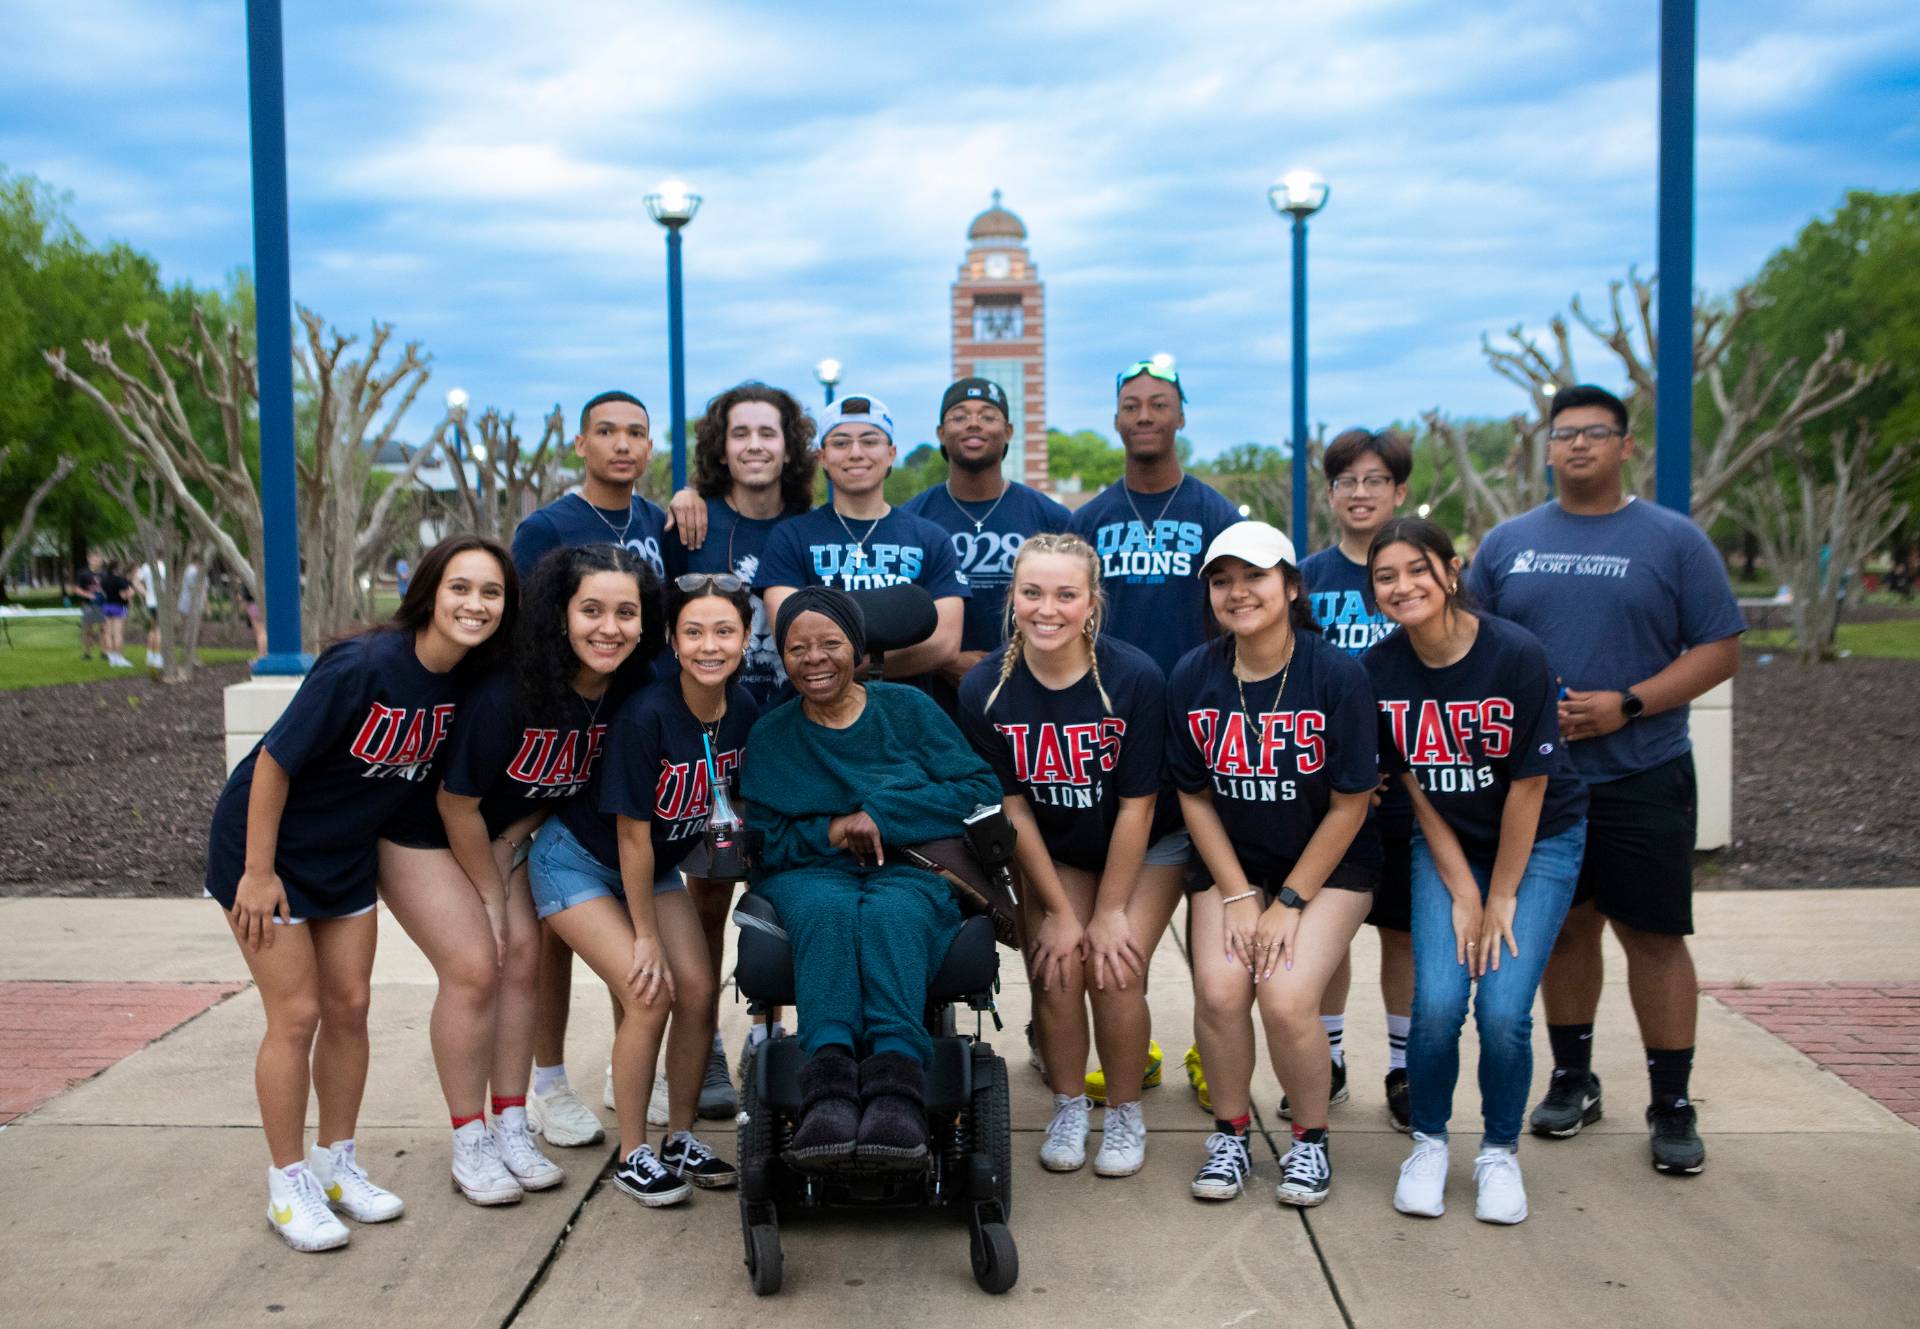 Charolette Tidwell poses with members of UAFS student organizations Men of Excellence and IDEAL Women during a campus kickball tournament held this spring in partnership with Antioch for Youth & Family.